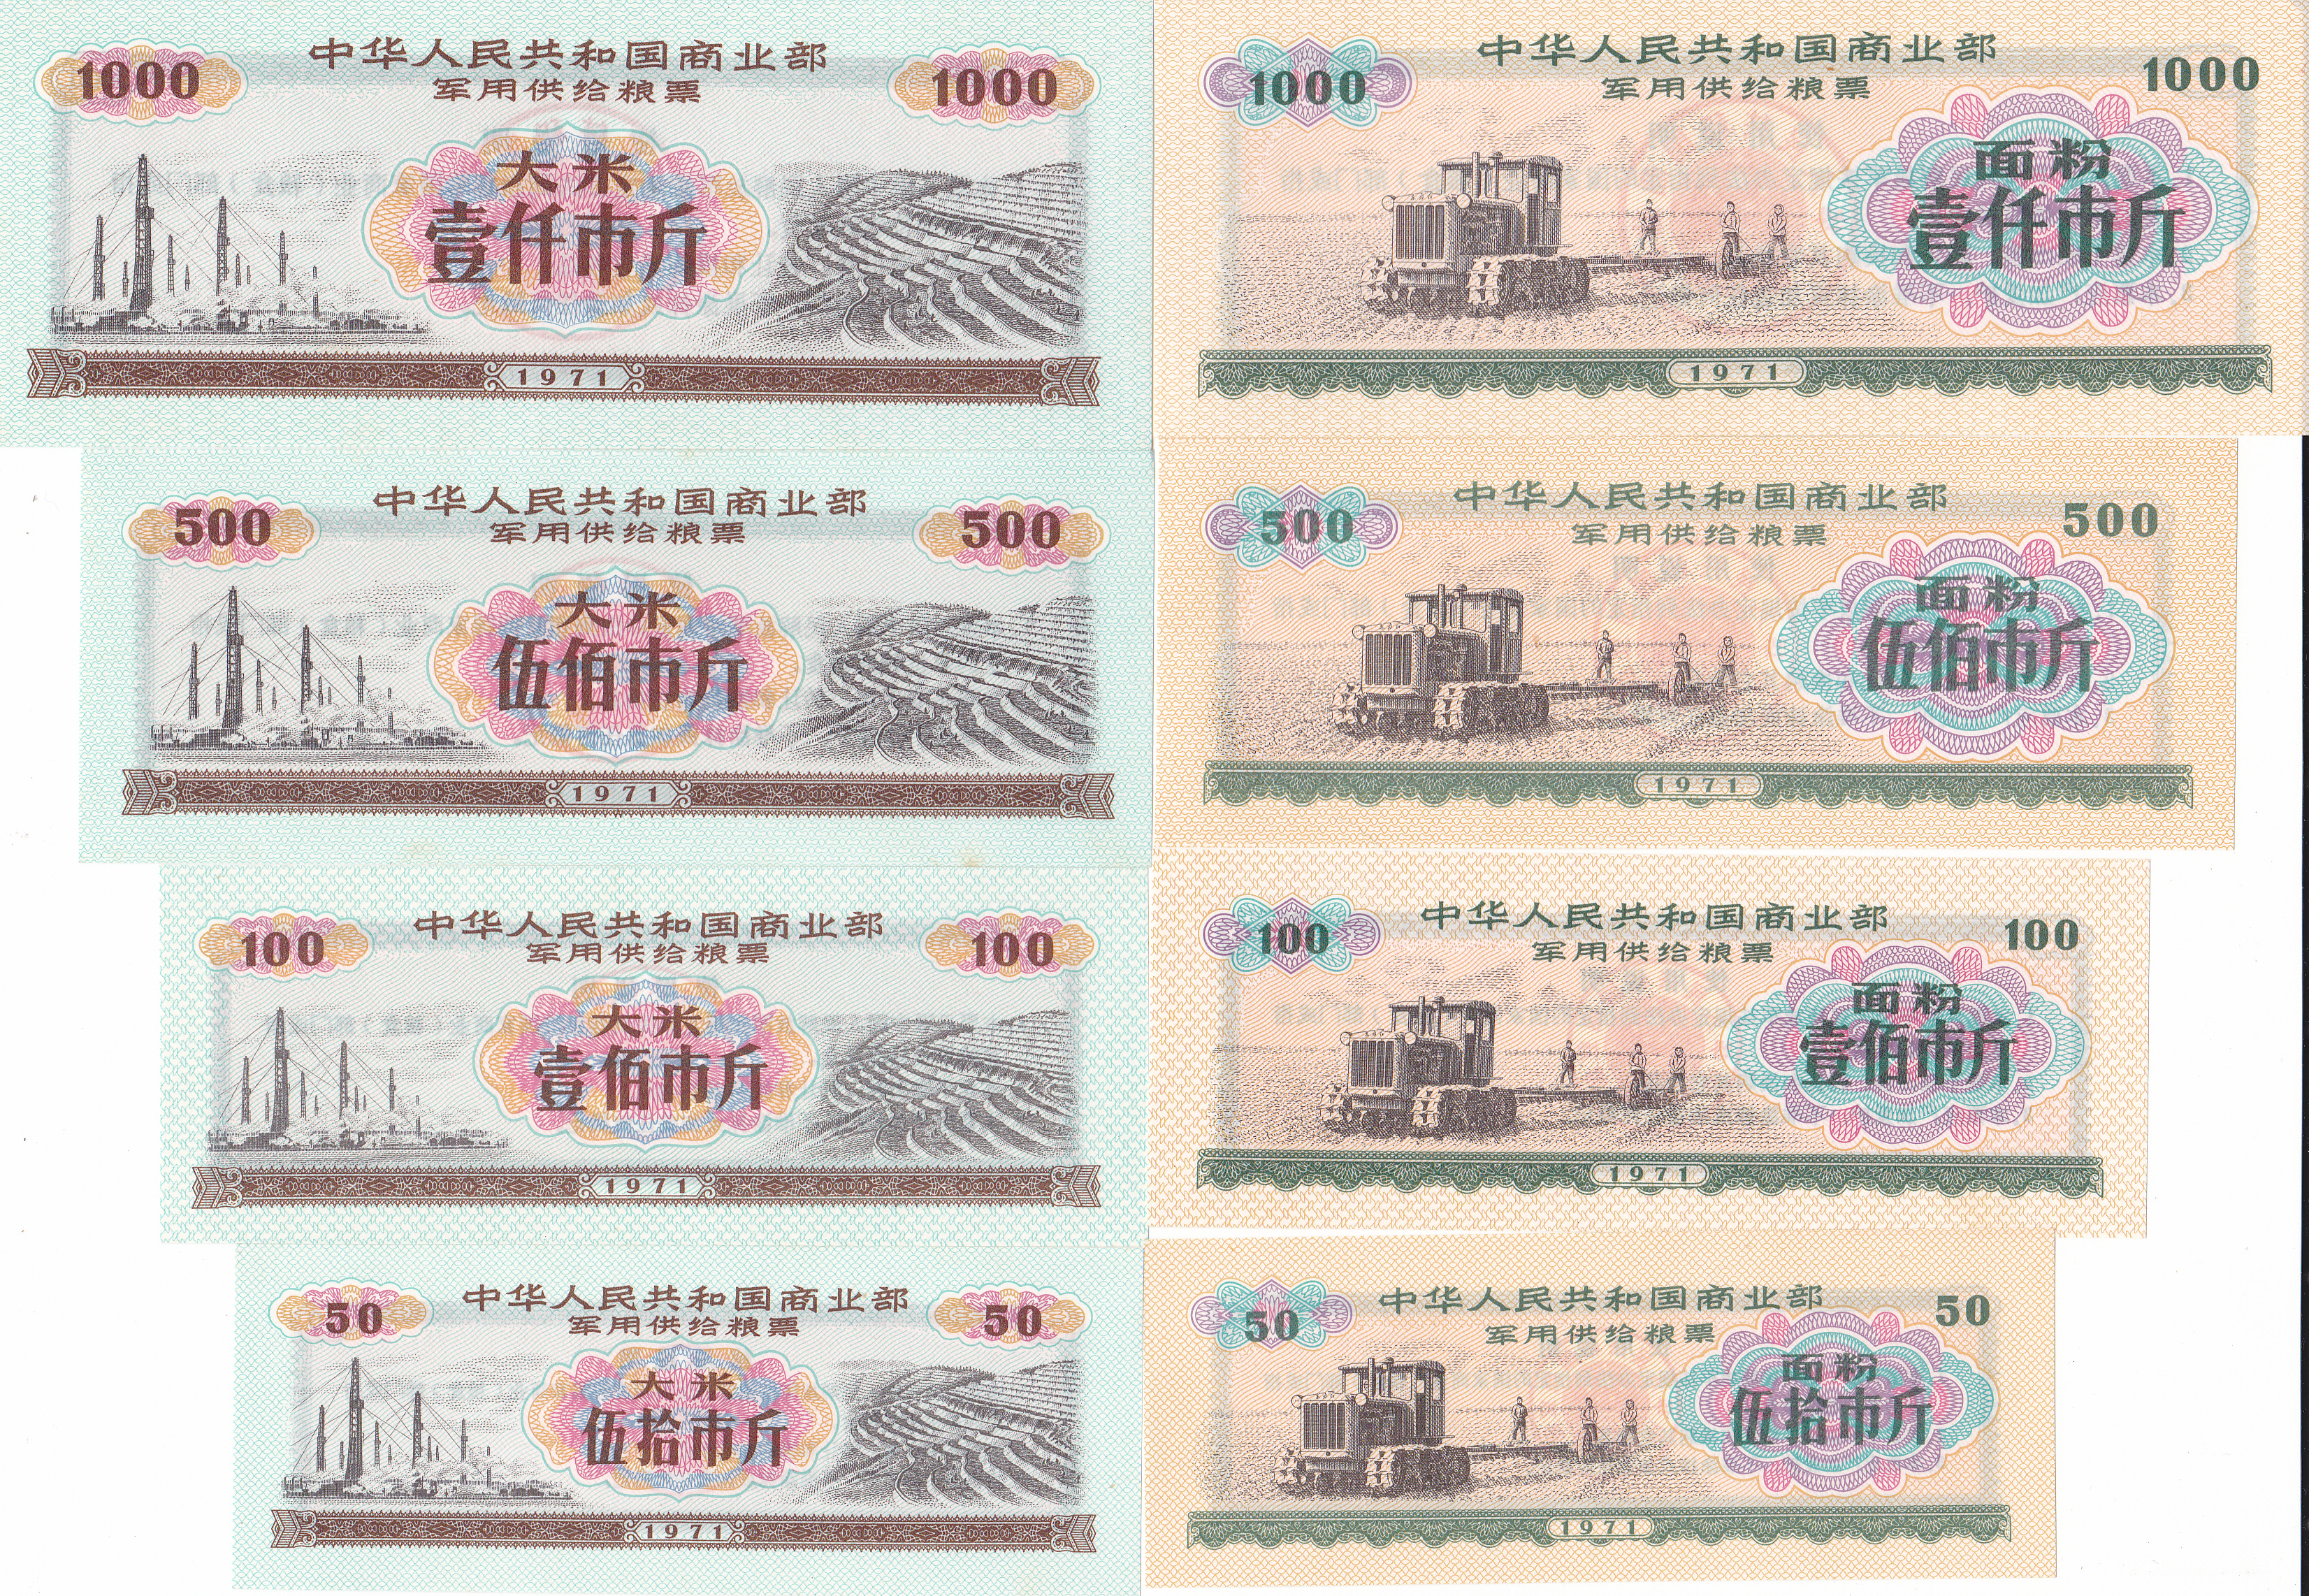 H0035, China Military Ration Coupons, 1971 Issue 8 pieces